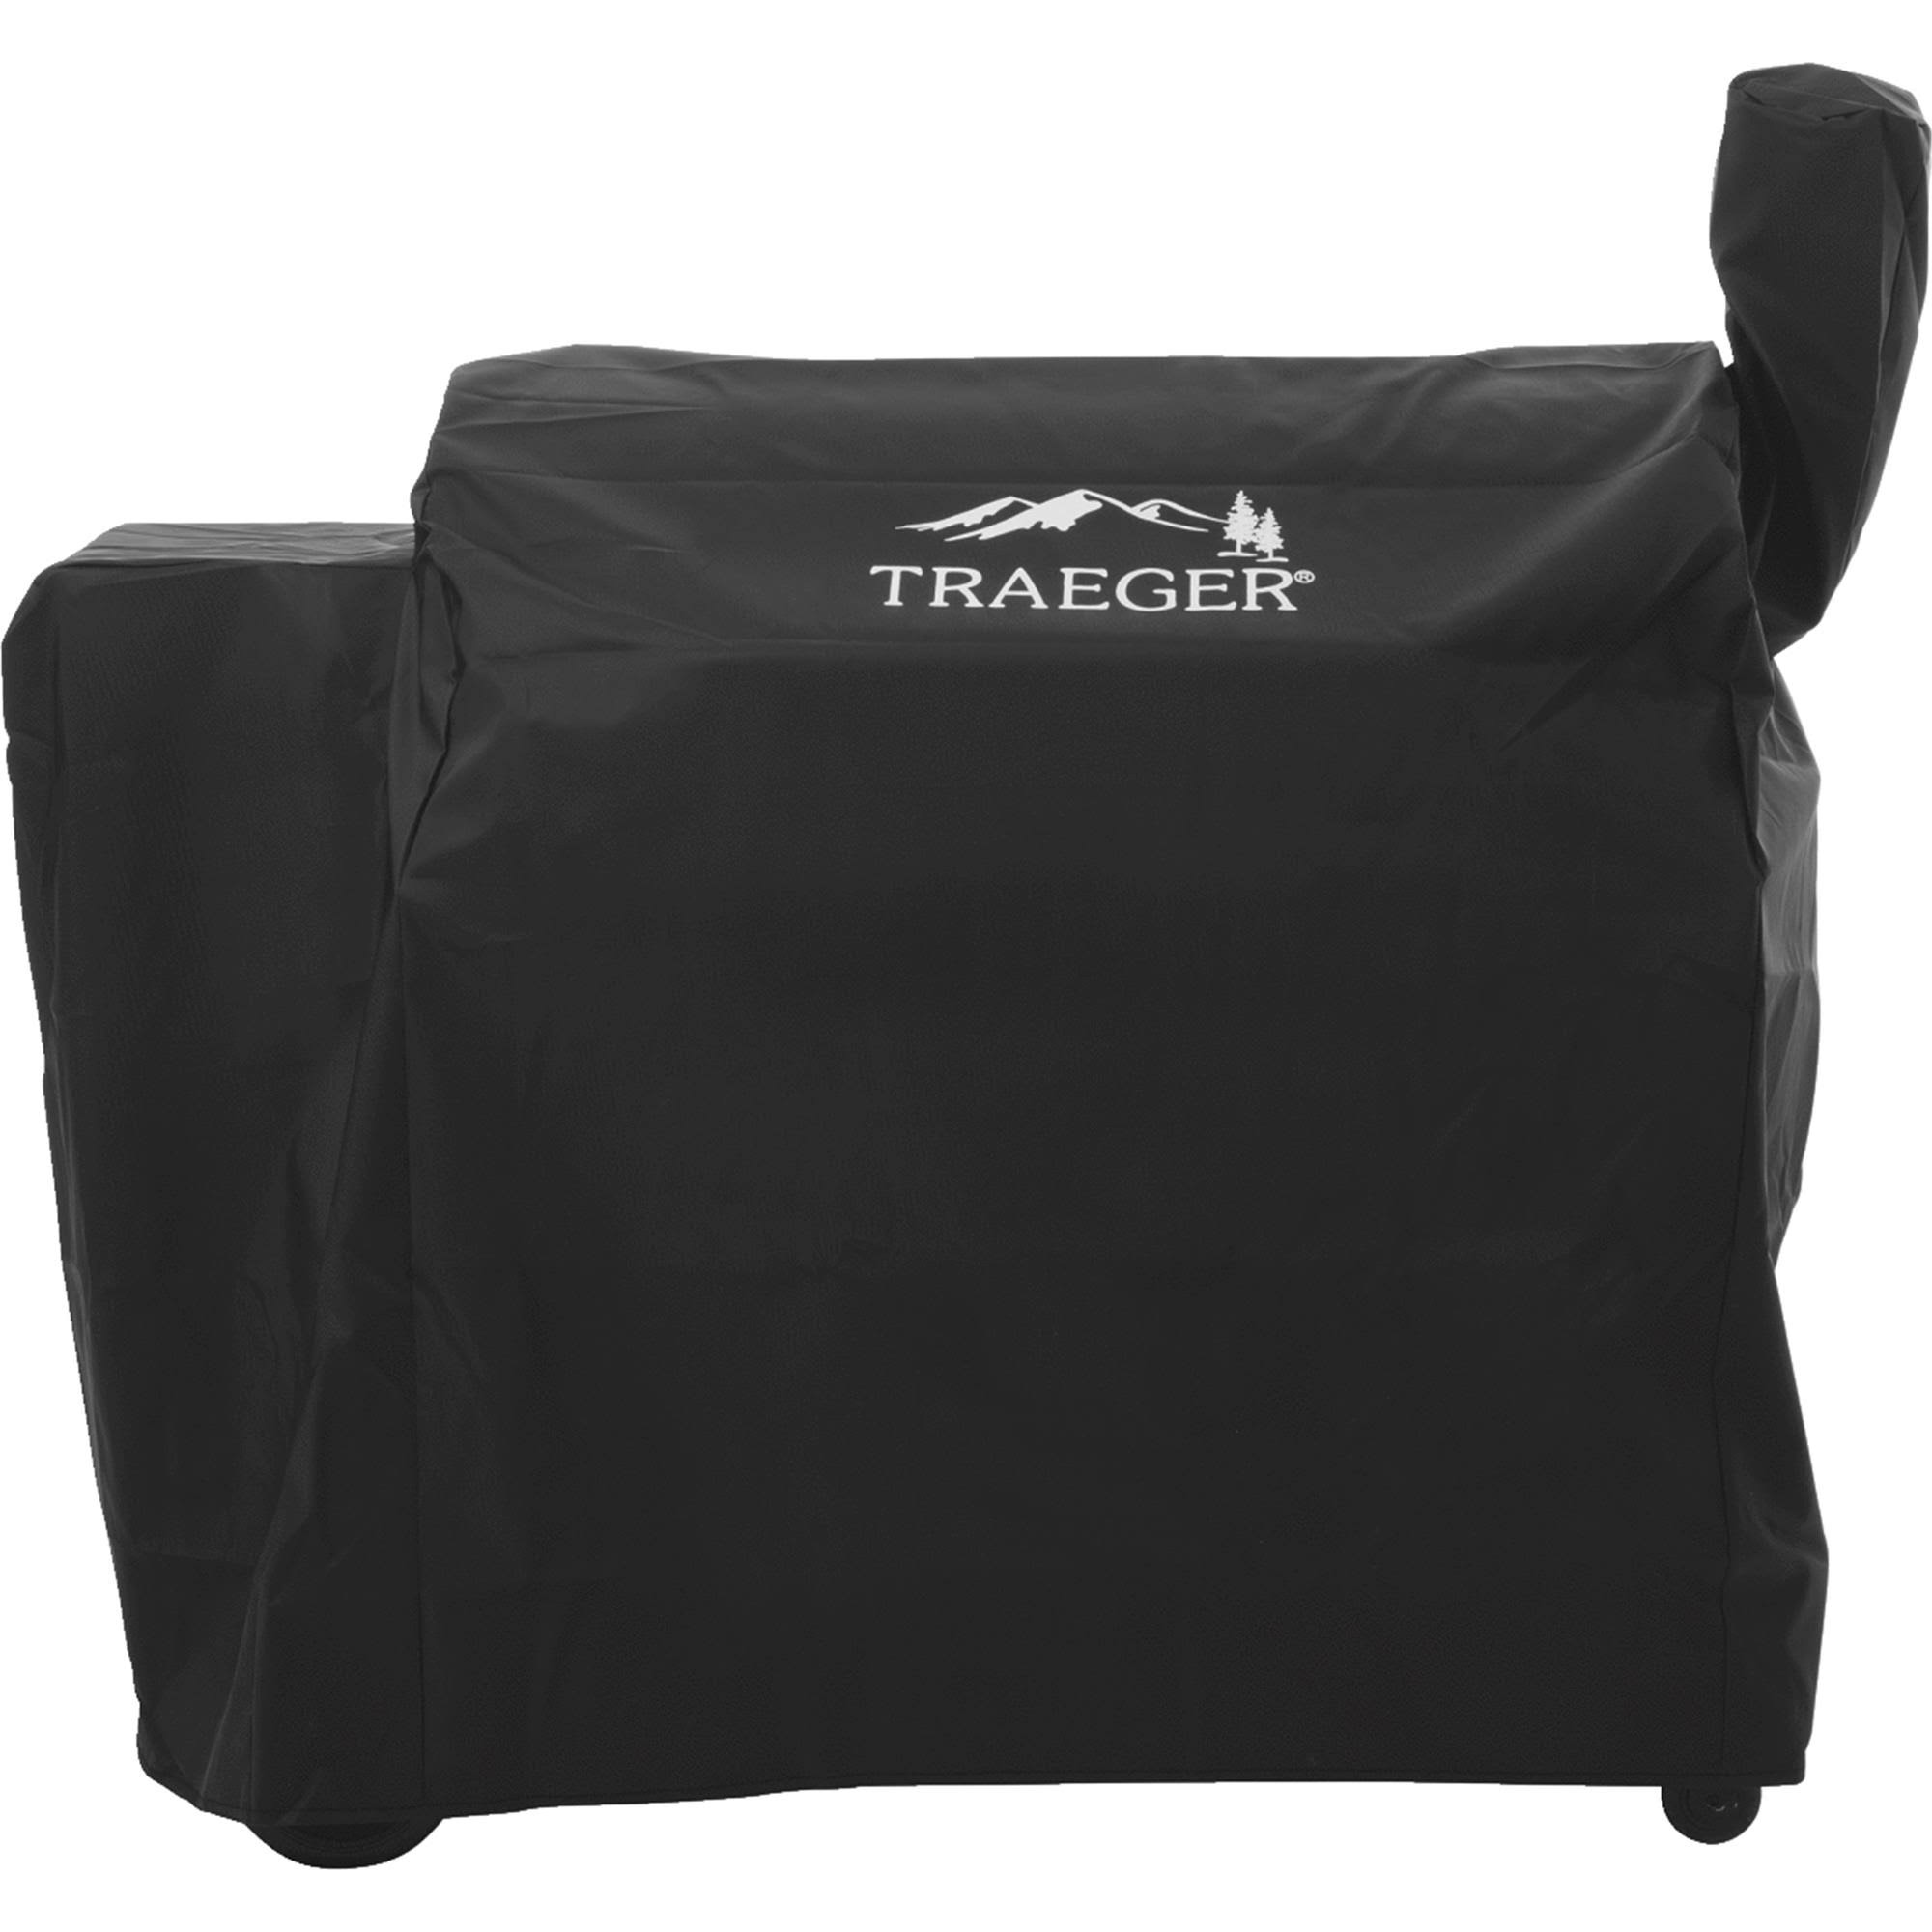 Traeger 34 Series Full-Length Grill Cover